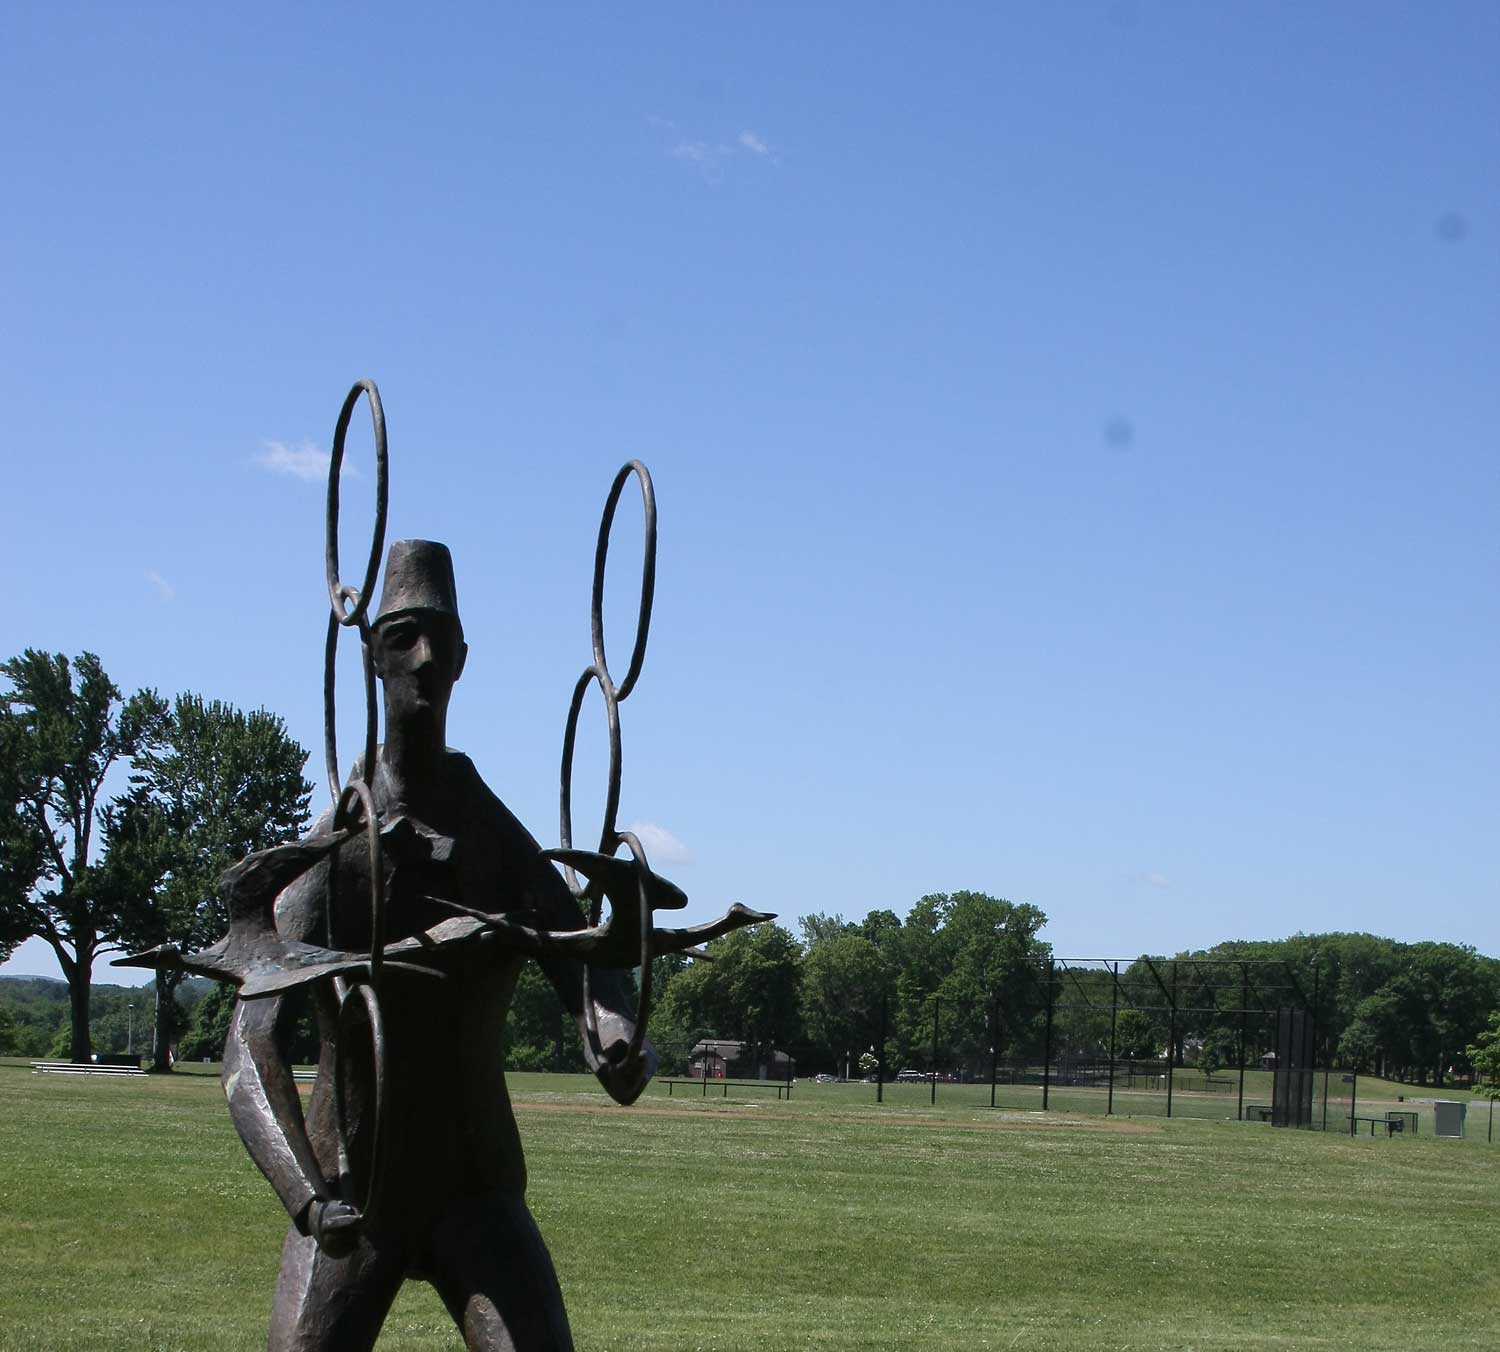 <p>Chaim Gross, <i>The Juggler,</i> 1975, Bronze, Long Term Loan from the Renee and Chaim Gross Foundation</p>